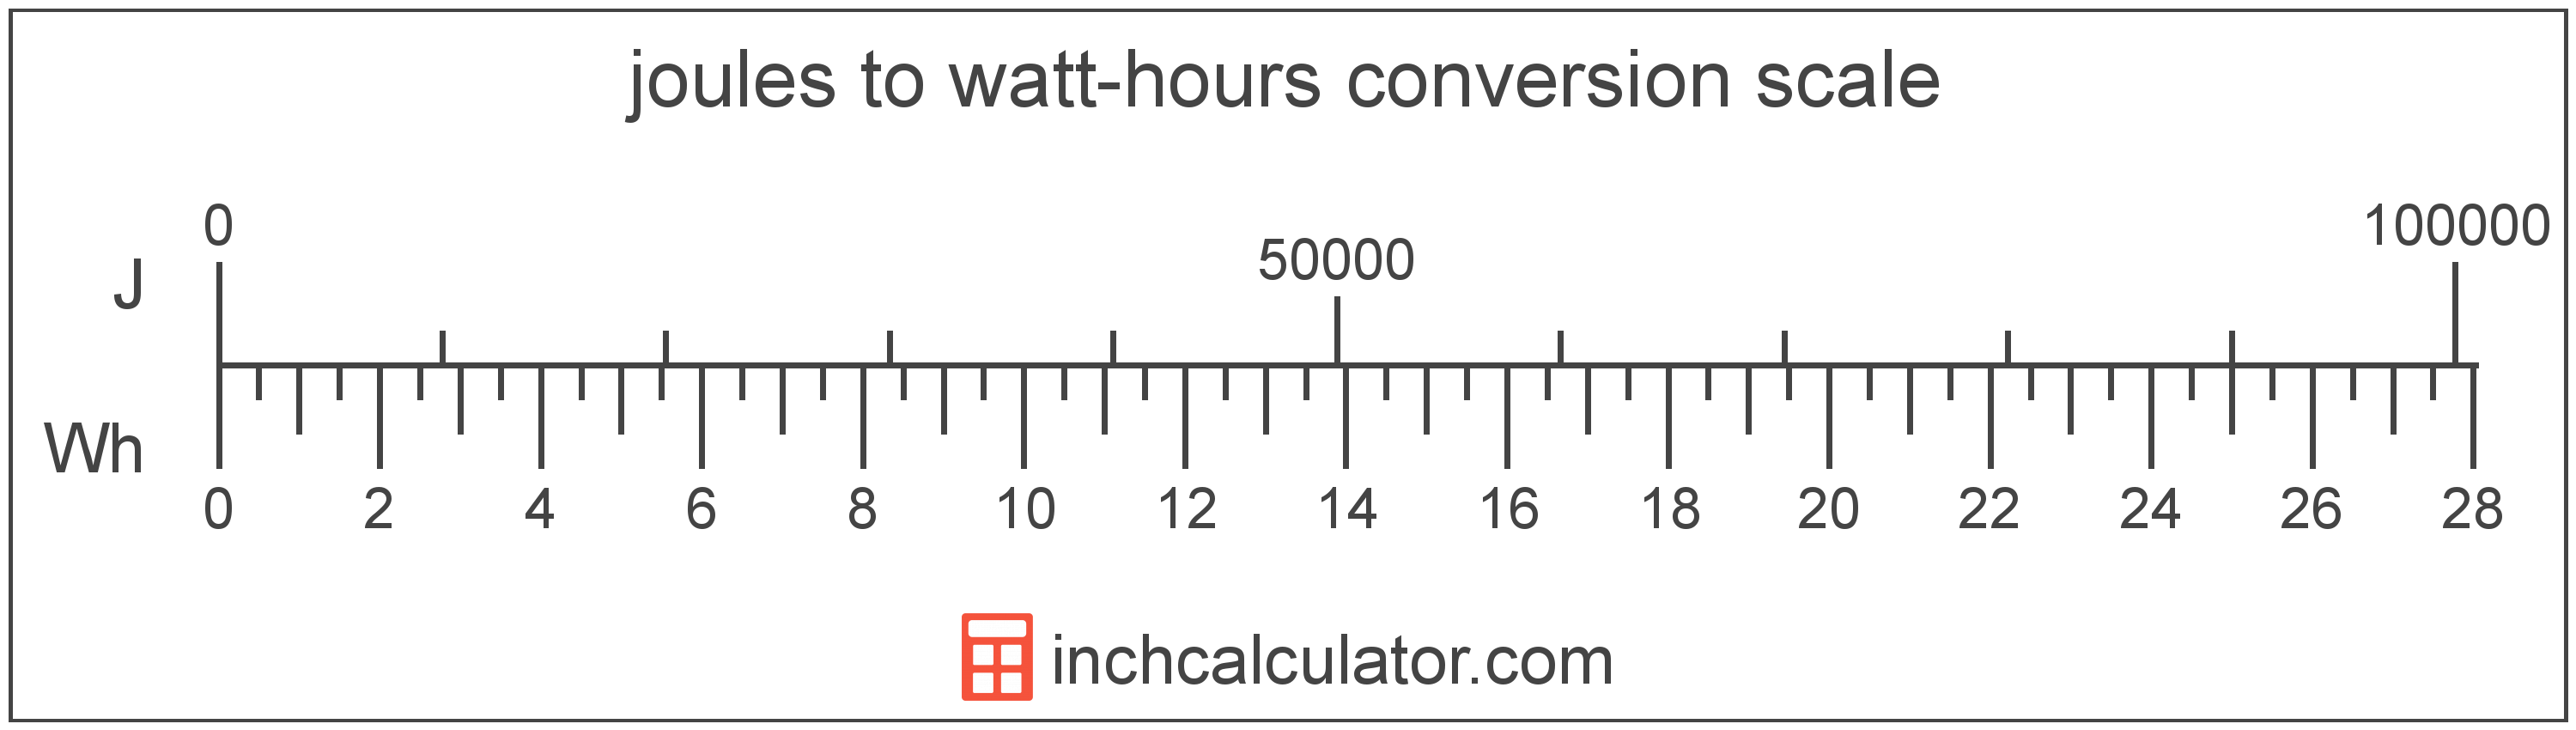 conversion scale showing watt-hours and equivalent joules energy values